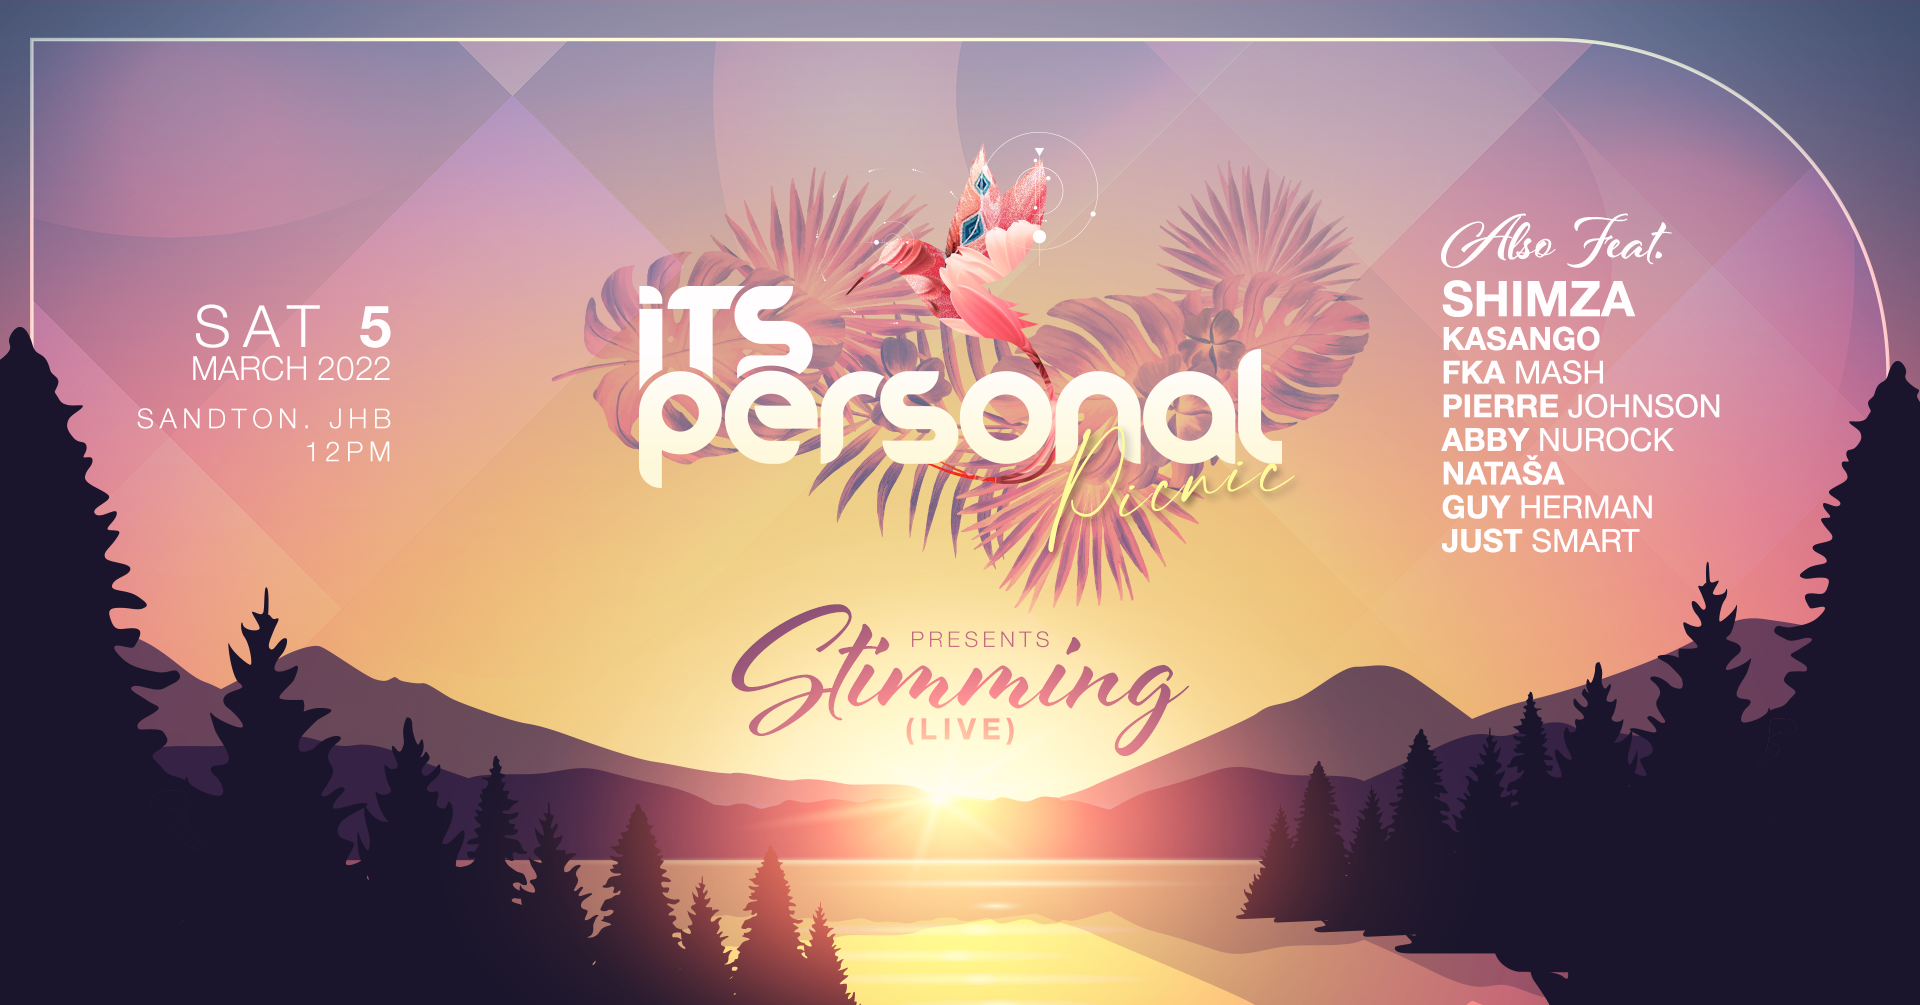 It's Personal Picnic feat. Stimming - Página frontal